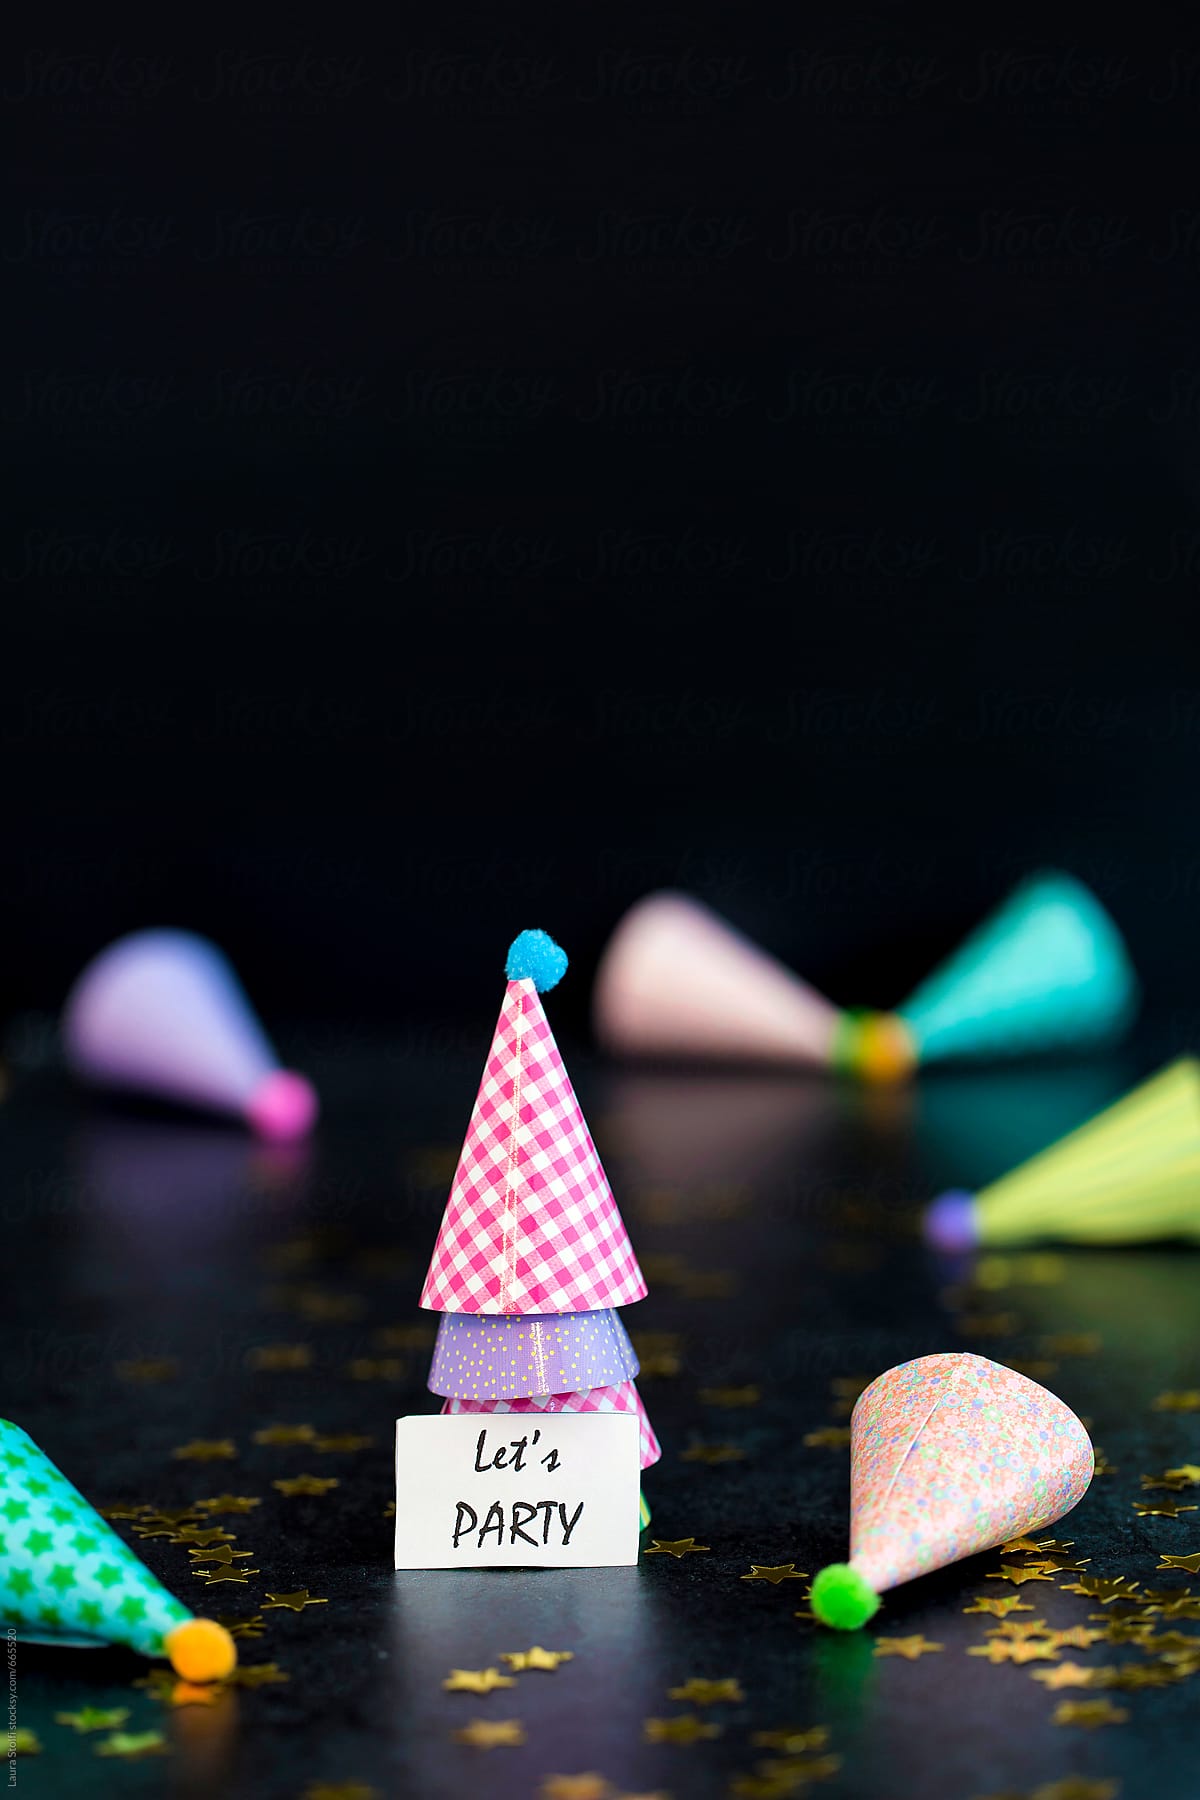 Let's party message in front of multi colored party hats